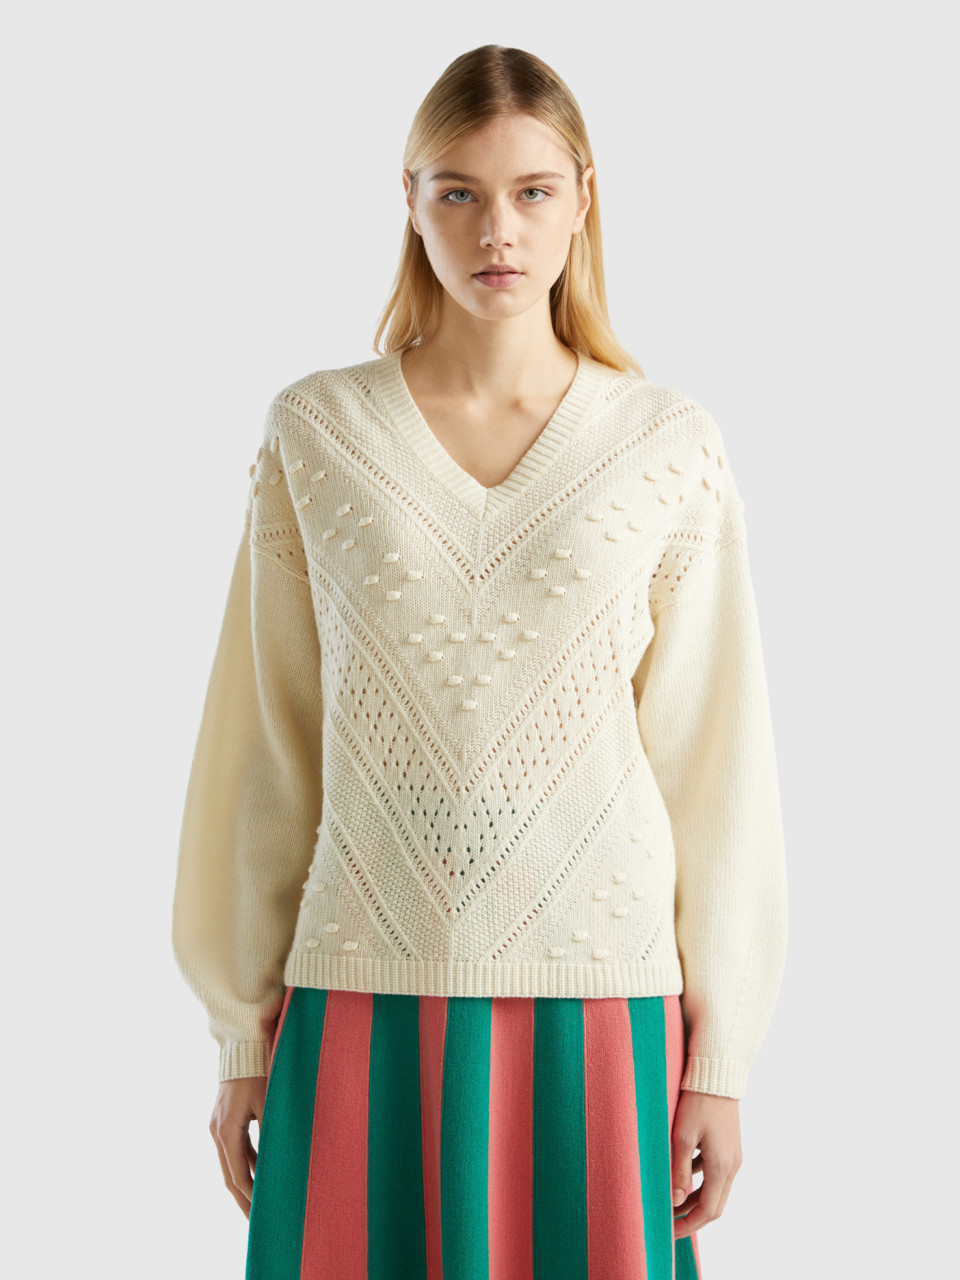 Benetton, Strickpullover Boxy Fit, Cremeweiss, female